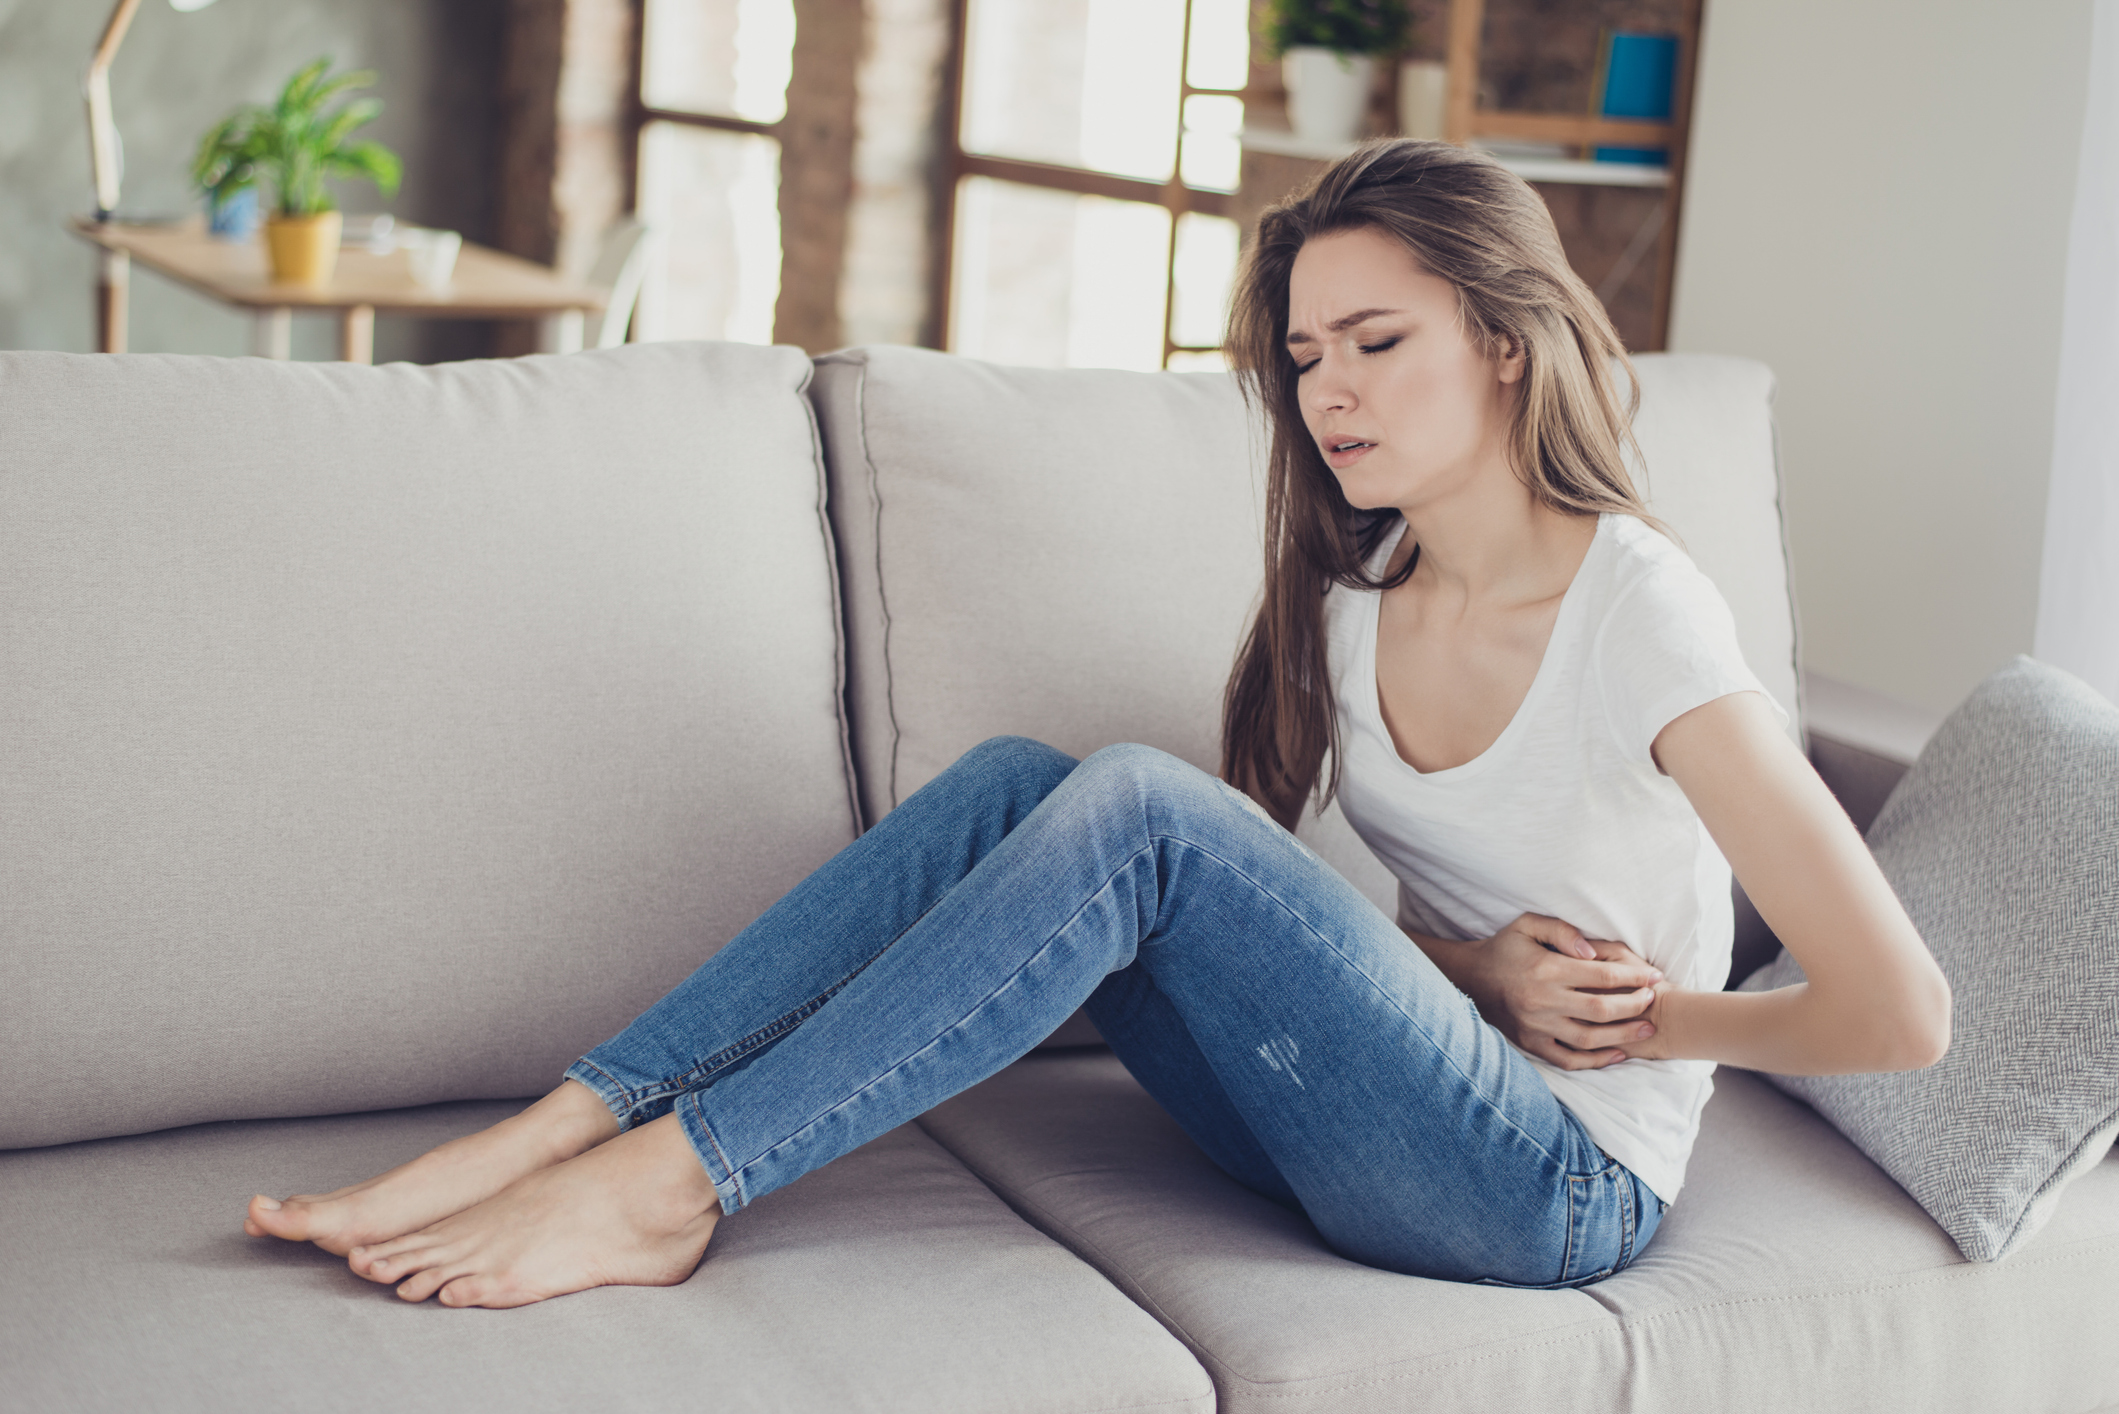 Young woman on a sofa holding her stomach because of pain related to constipation. Credit: Deagreez